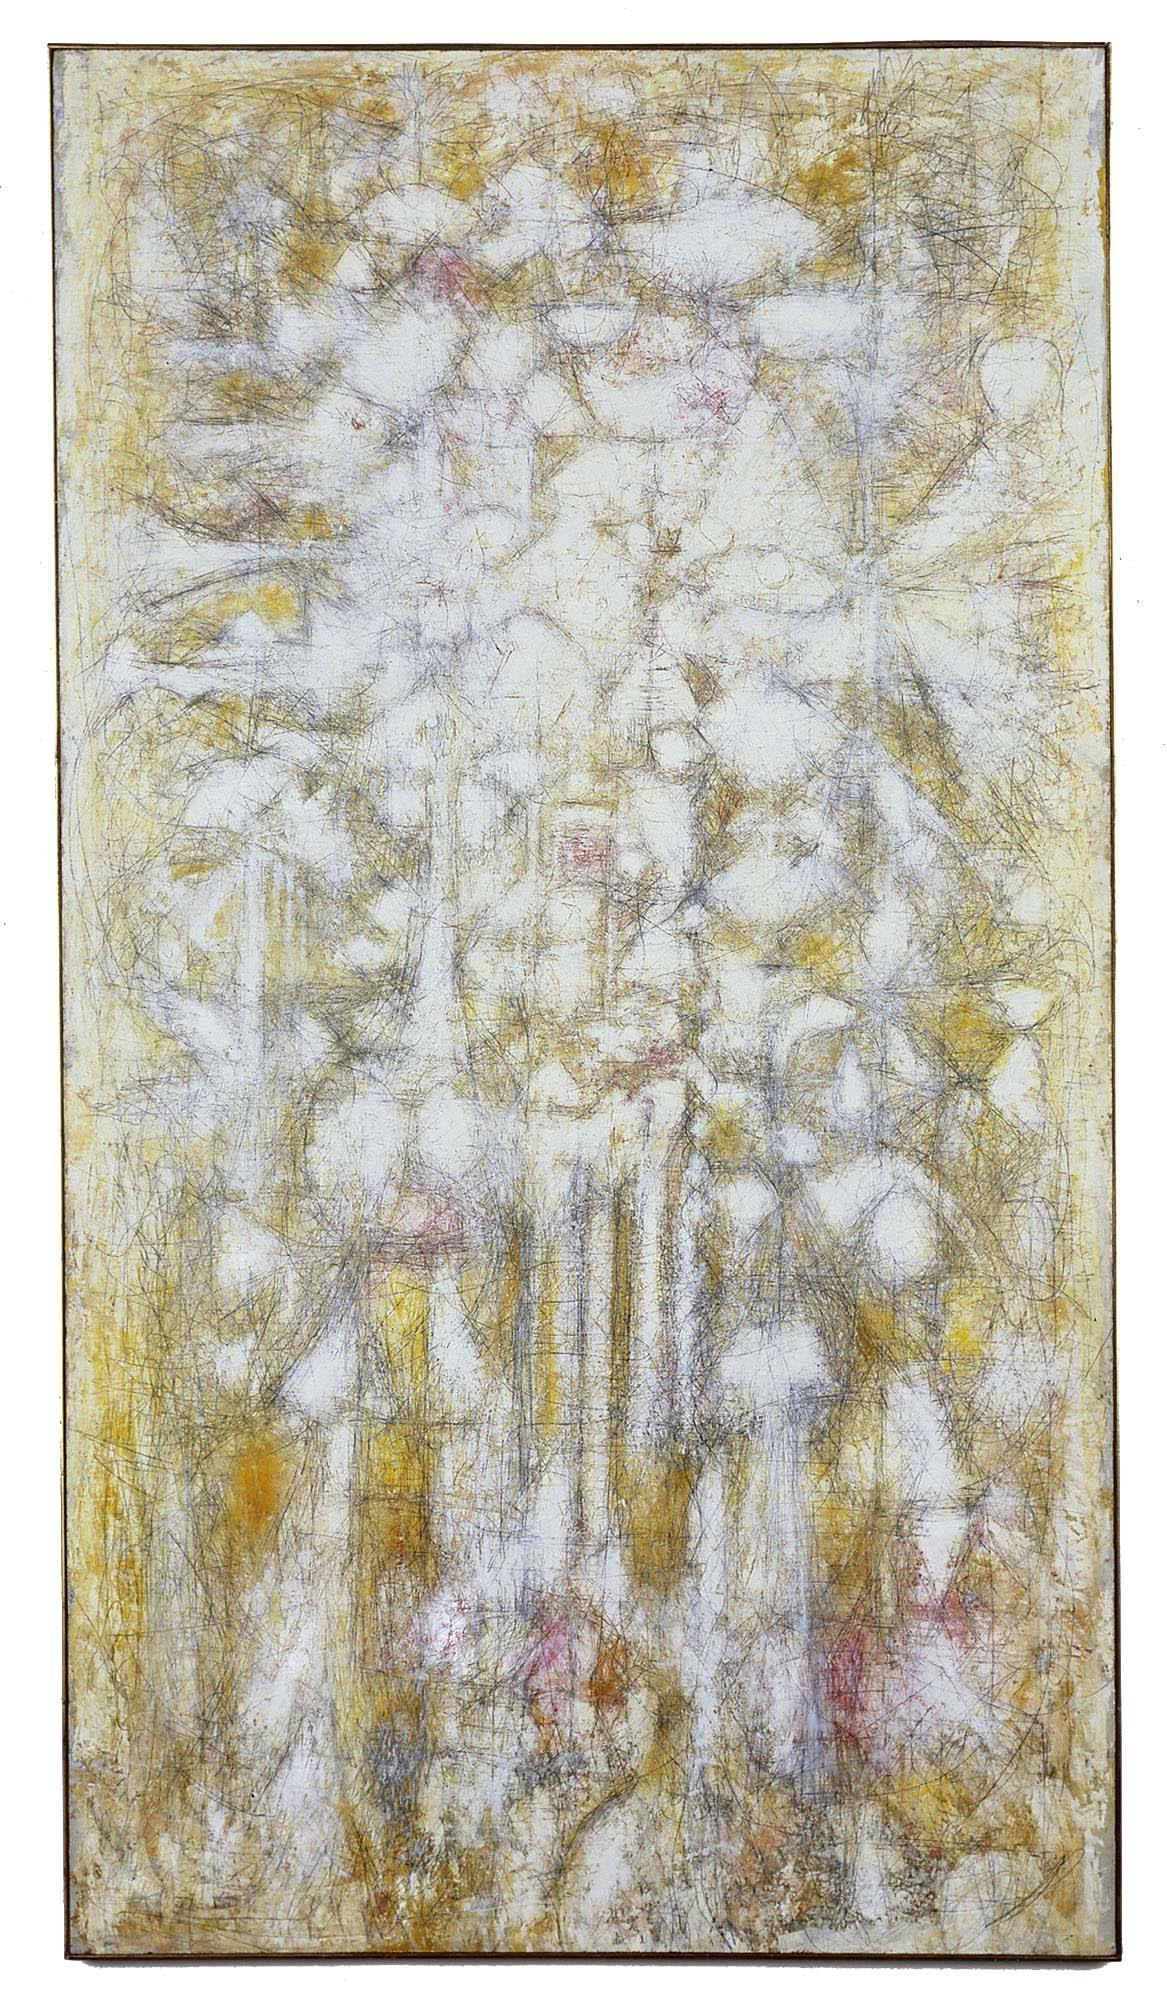 Golden Dawn
1952
Oil and graphite on linen
93 1/2 x 51 1/2 in. (237.5 x 130.8 cm)
North Carolina Museum of Art, Raleigh, N.C., Bequest of Fannie and Alan Leslie (2006.21.16)
 – The Richard Pousette-Dart Foundation